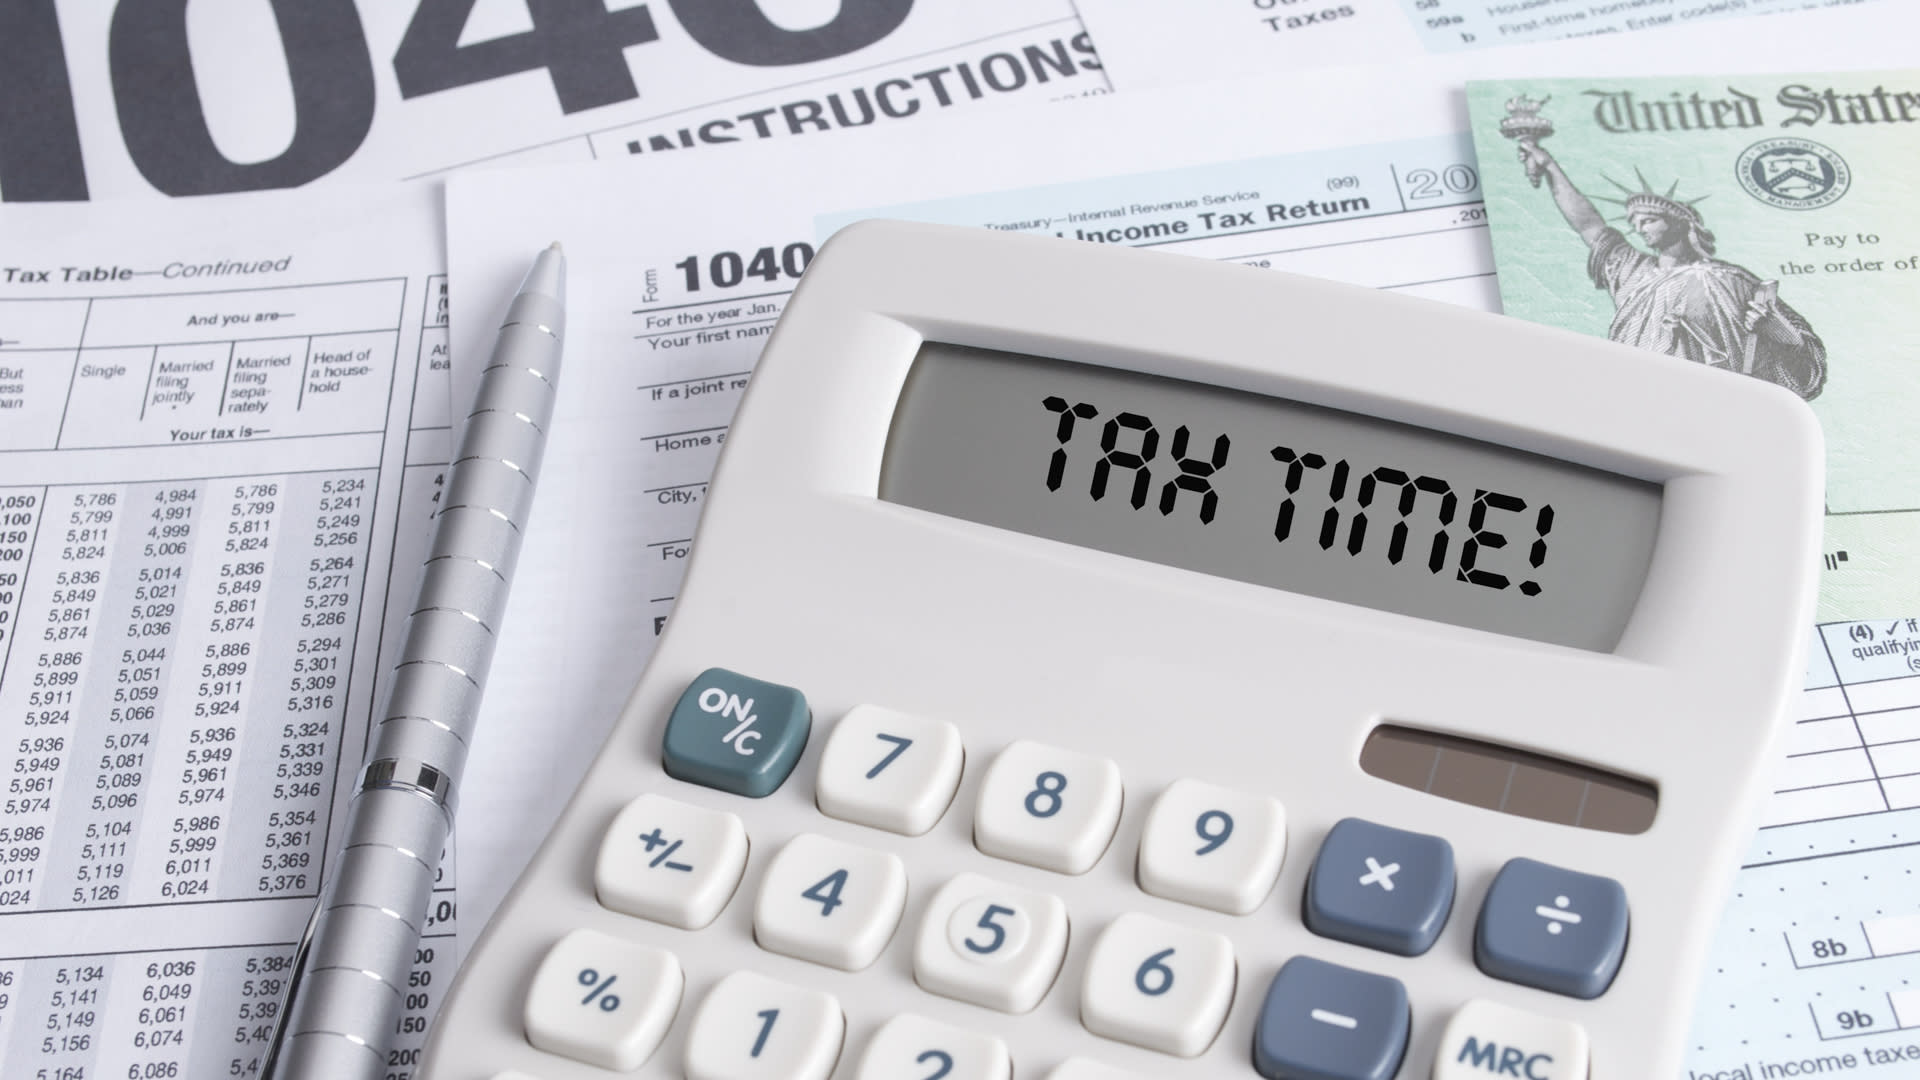 Free State Tax Filing Options